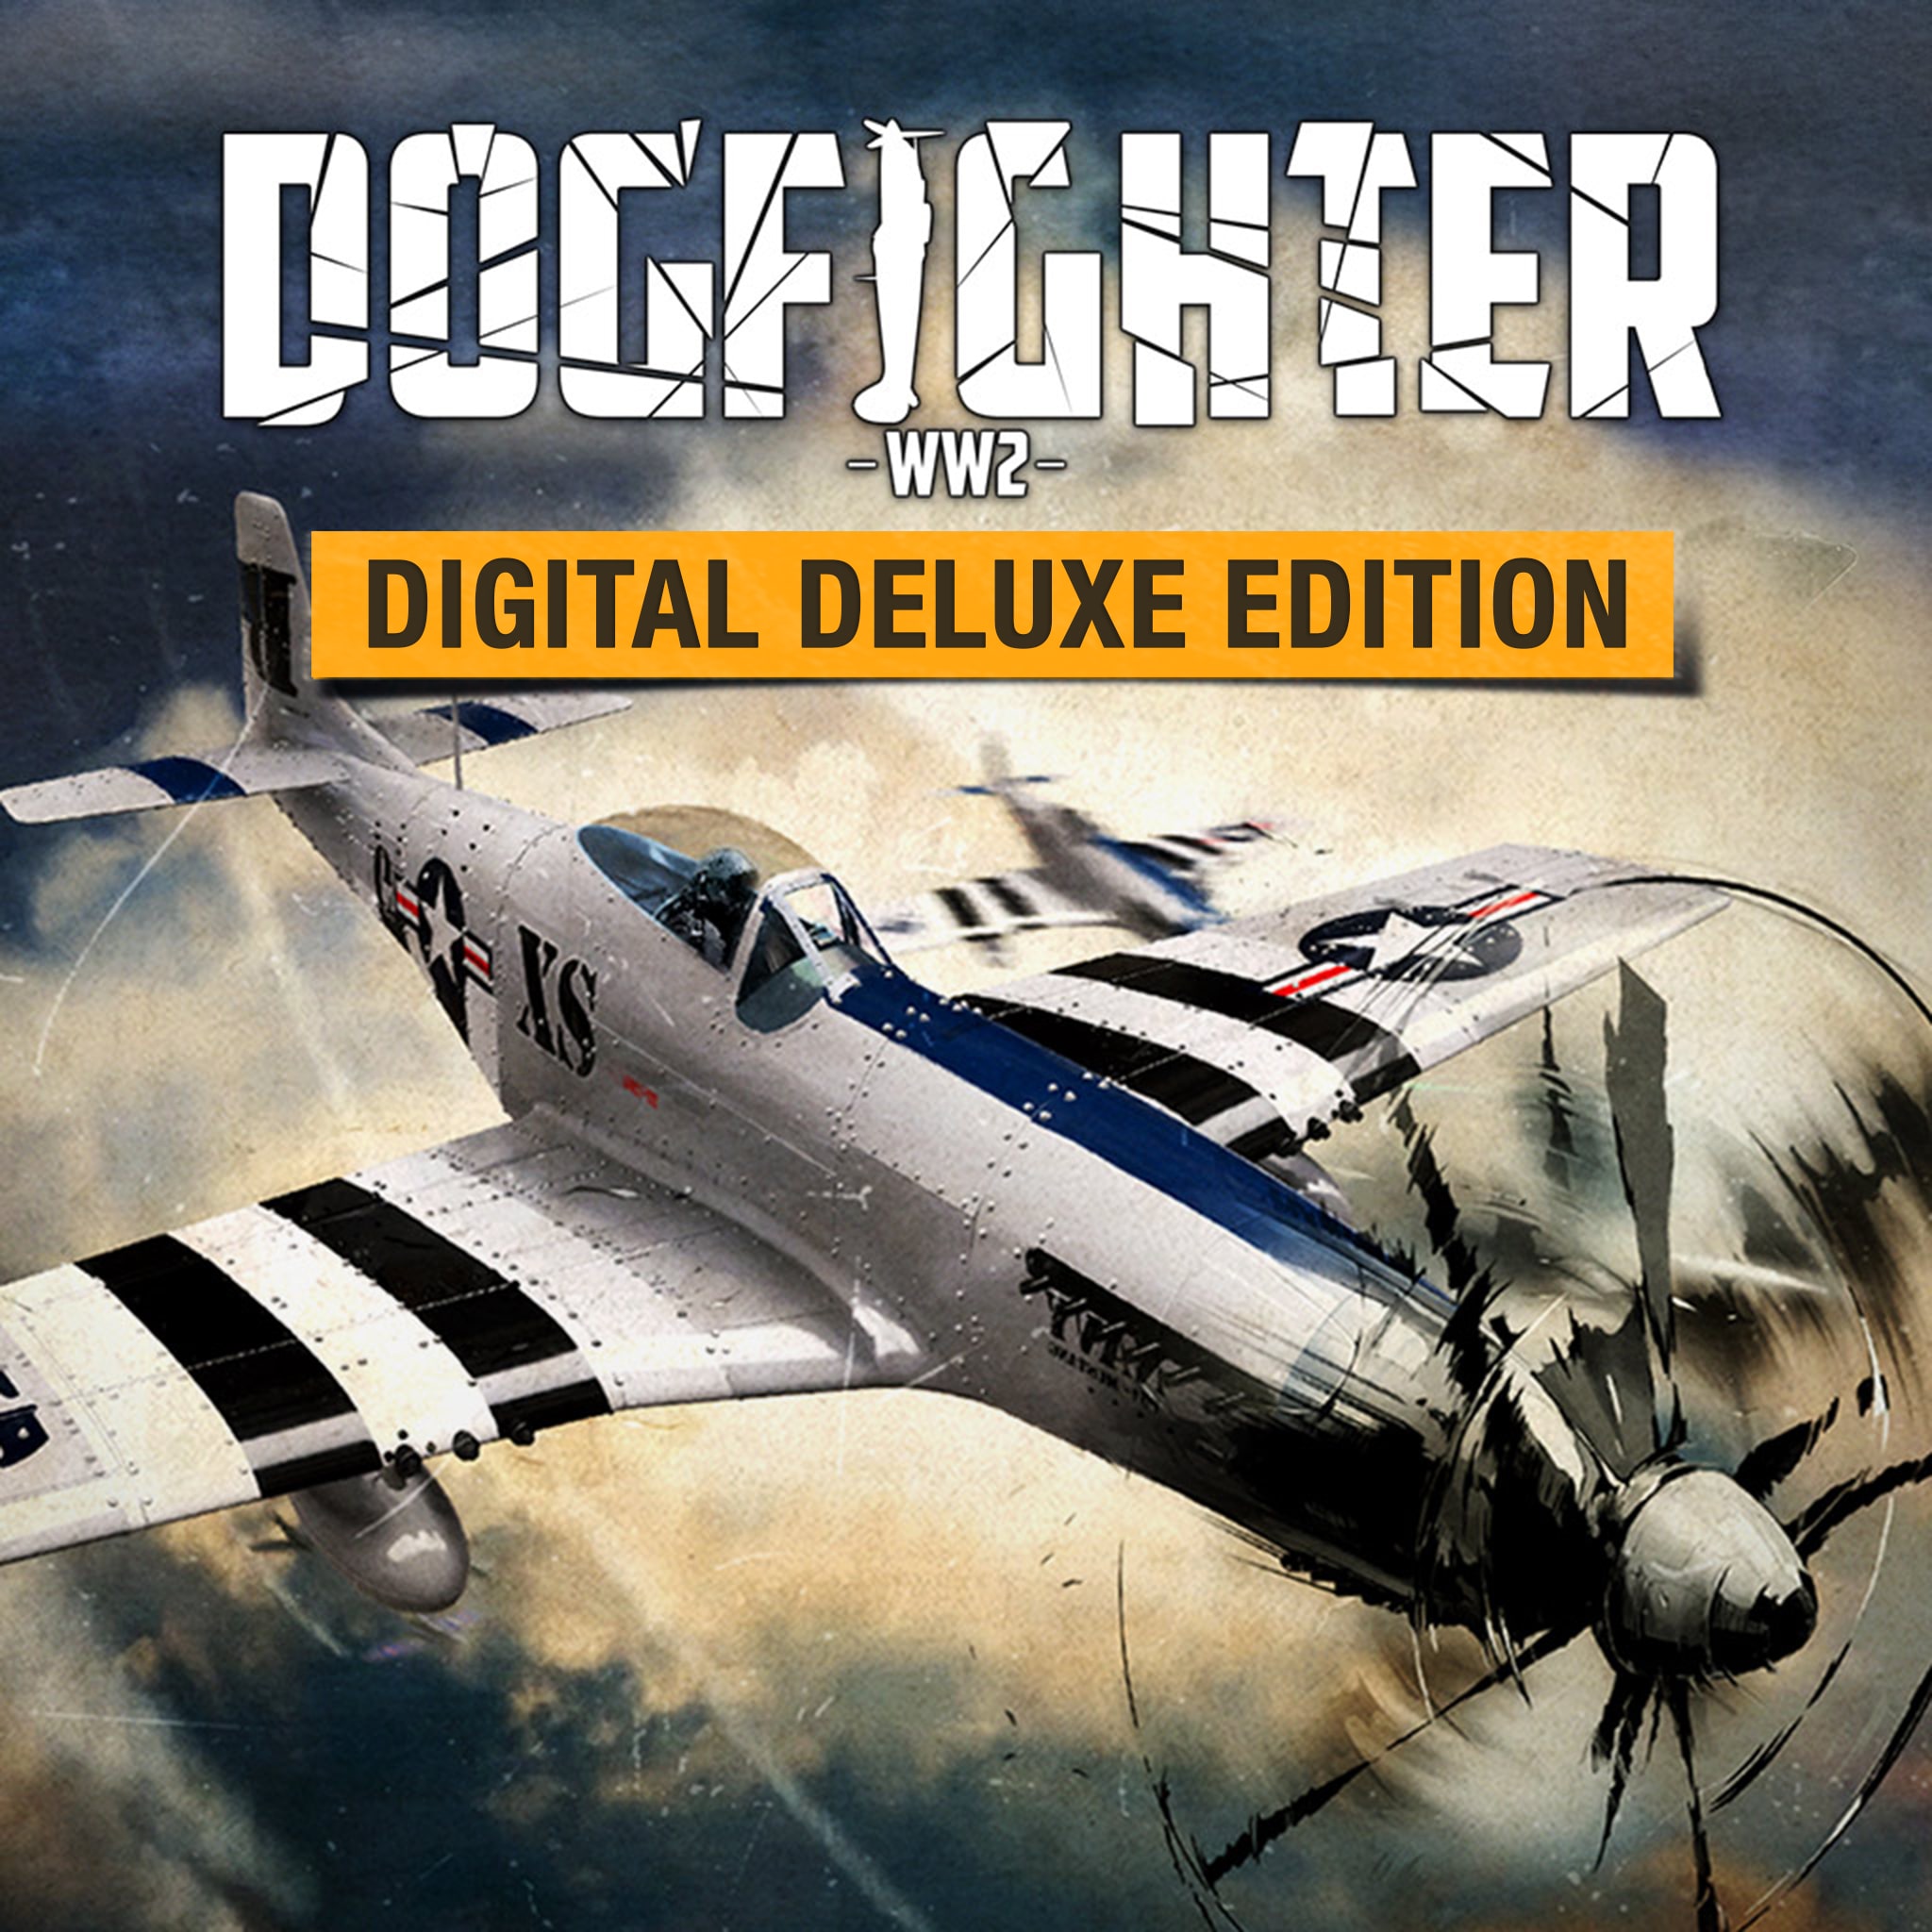 DOGFIGHTER